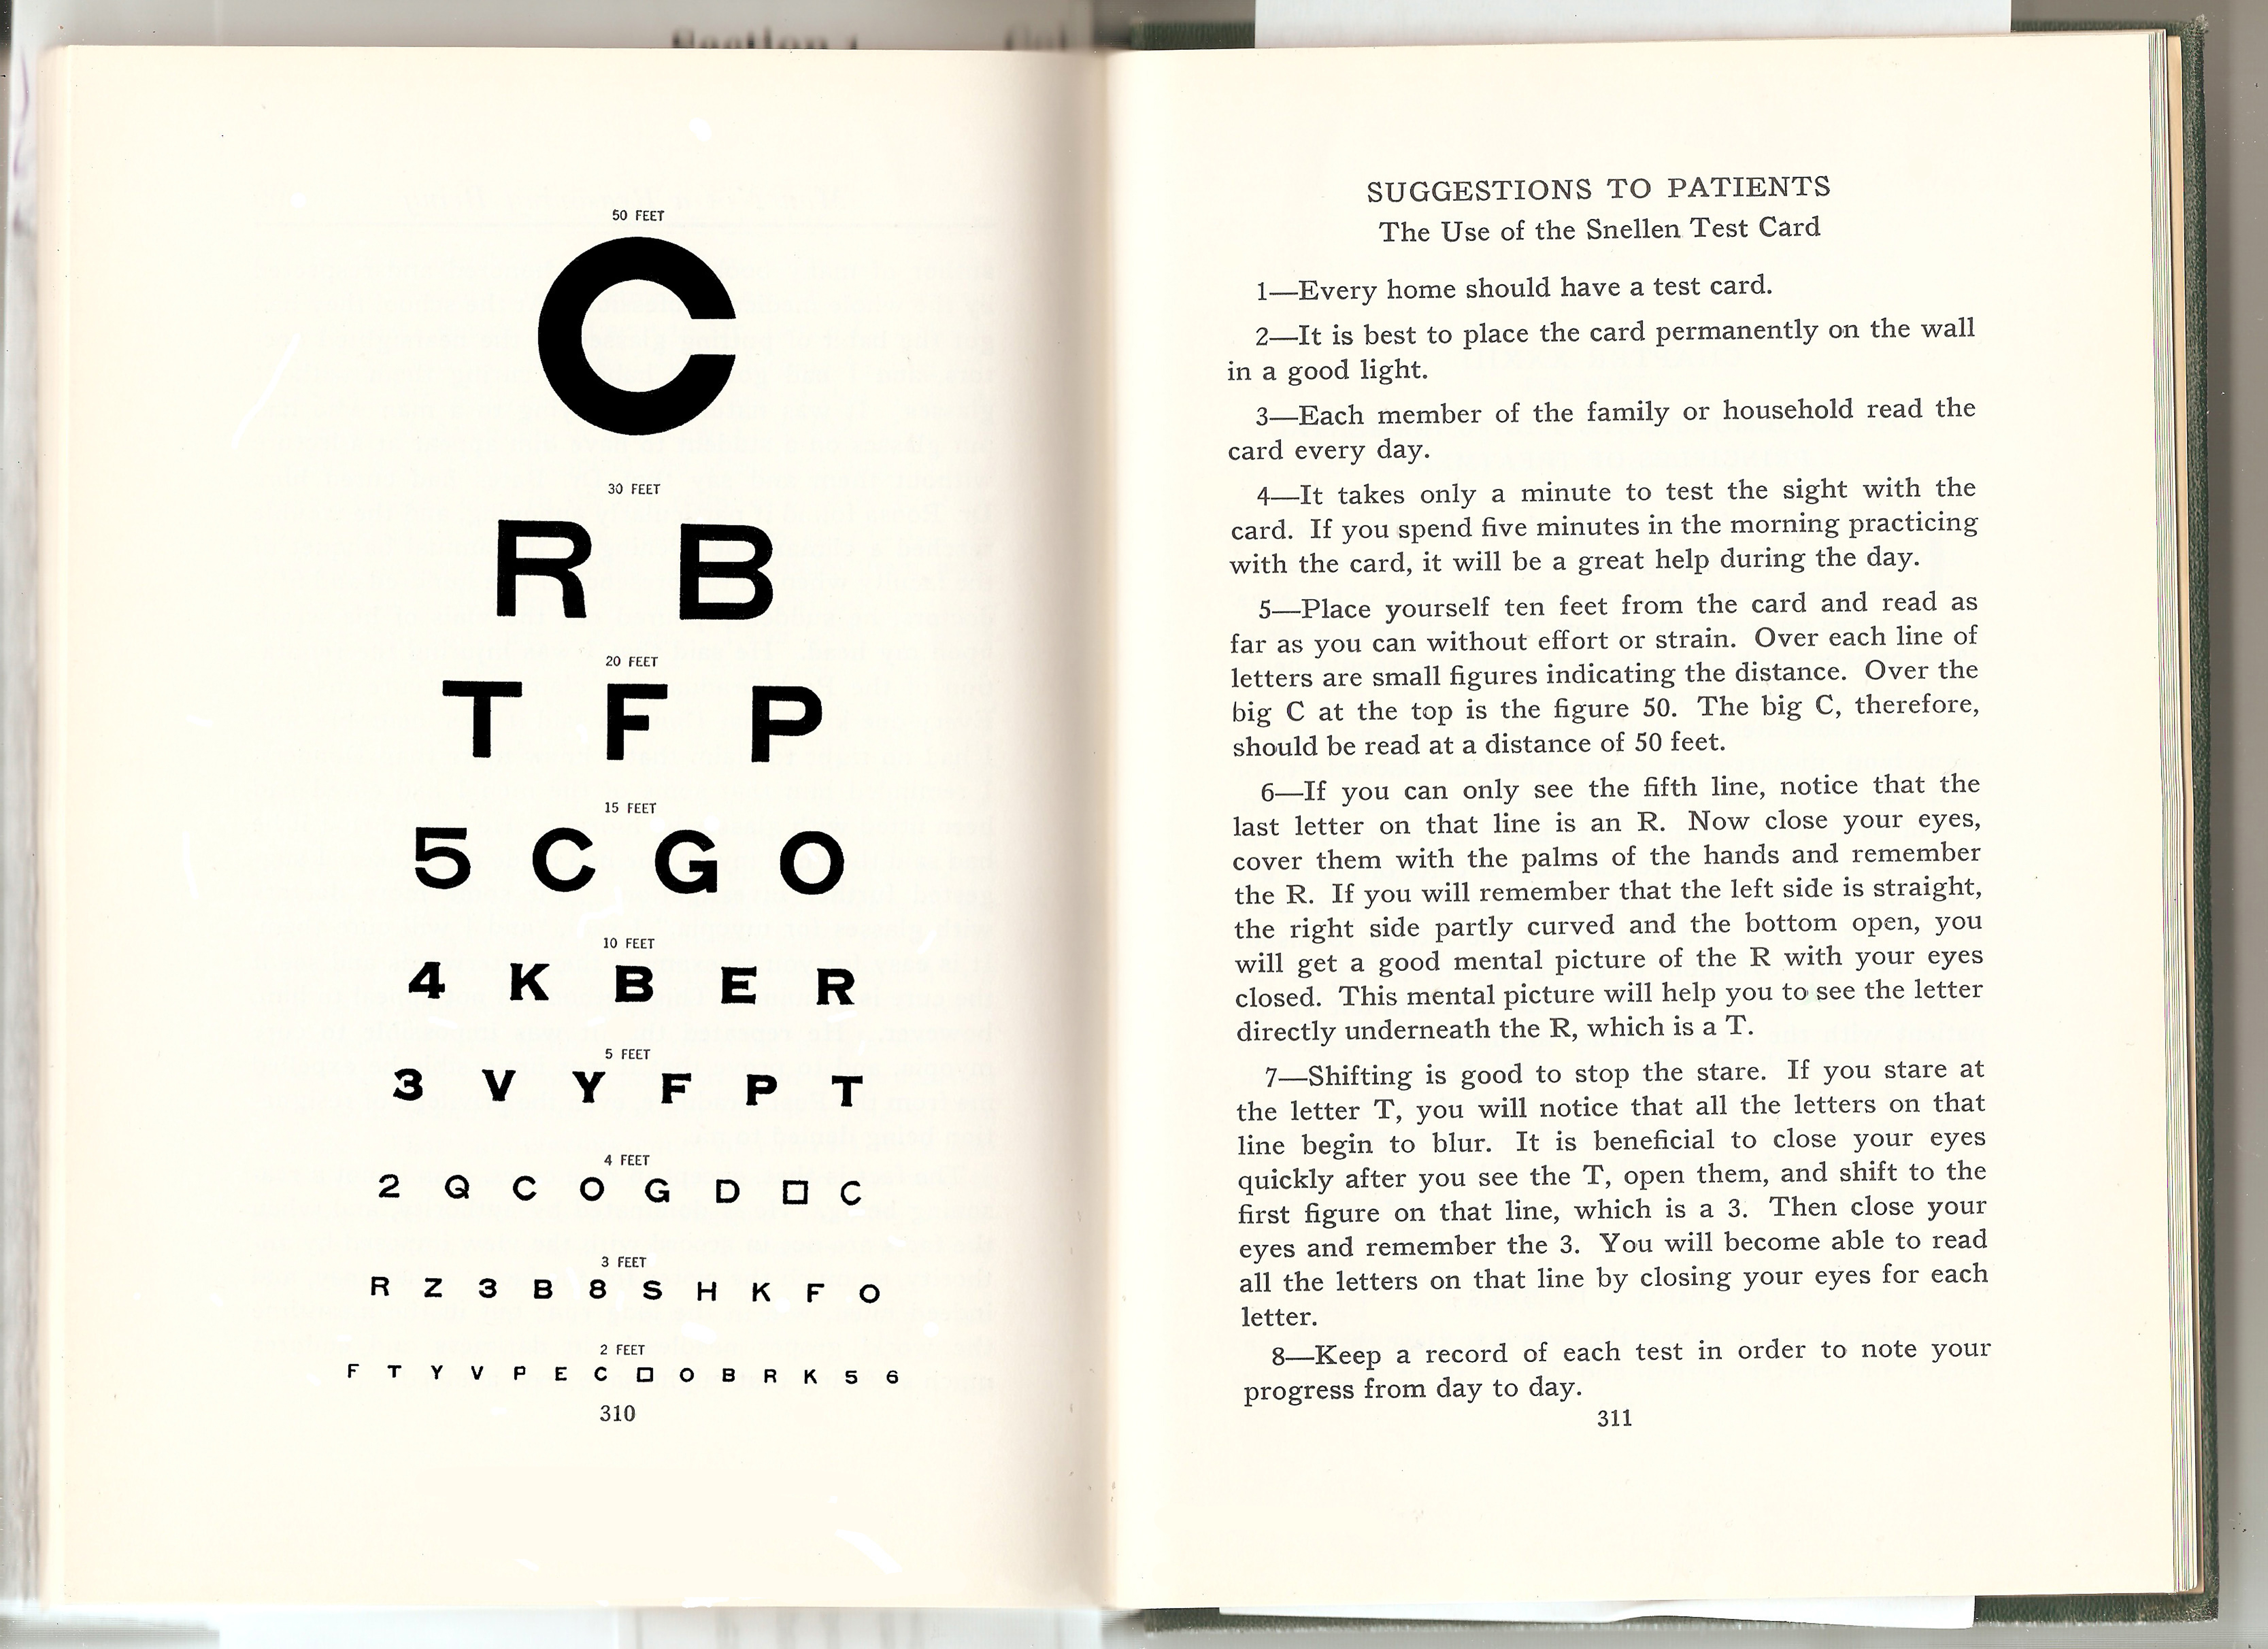 1940 Perfect Sight Without Glasses - Dr. Bates, Emily's C Eyechart with Suggestions to Patients - 1940 PSWG Edition